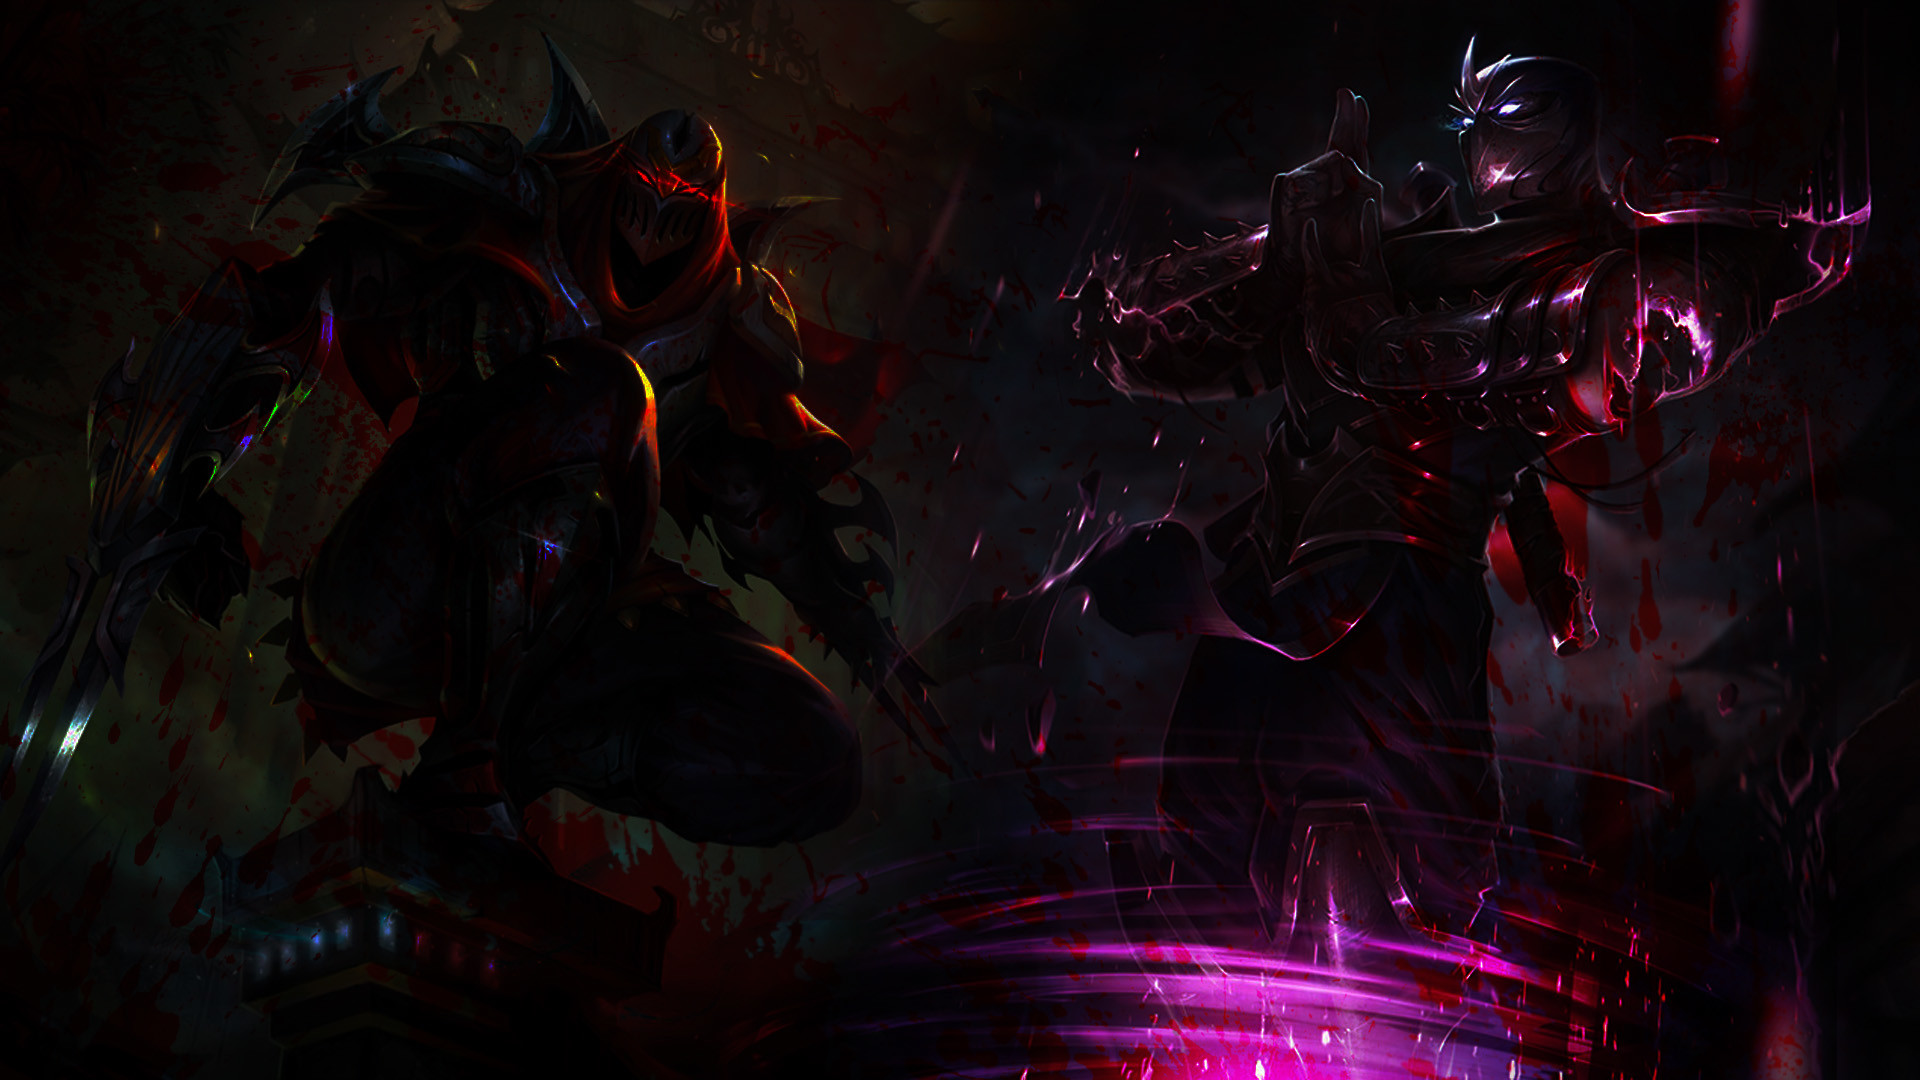 Zed and Shen Wallpaper by xsurfspyx Zed and Shen Wallpaper by xsurfspyx